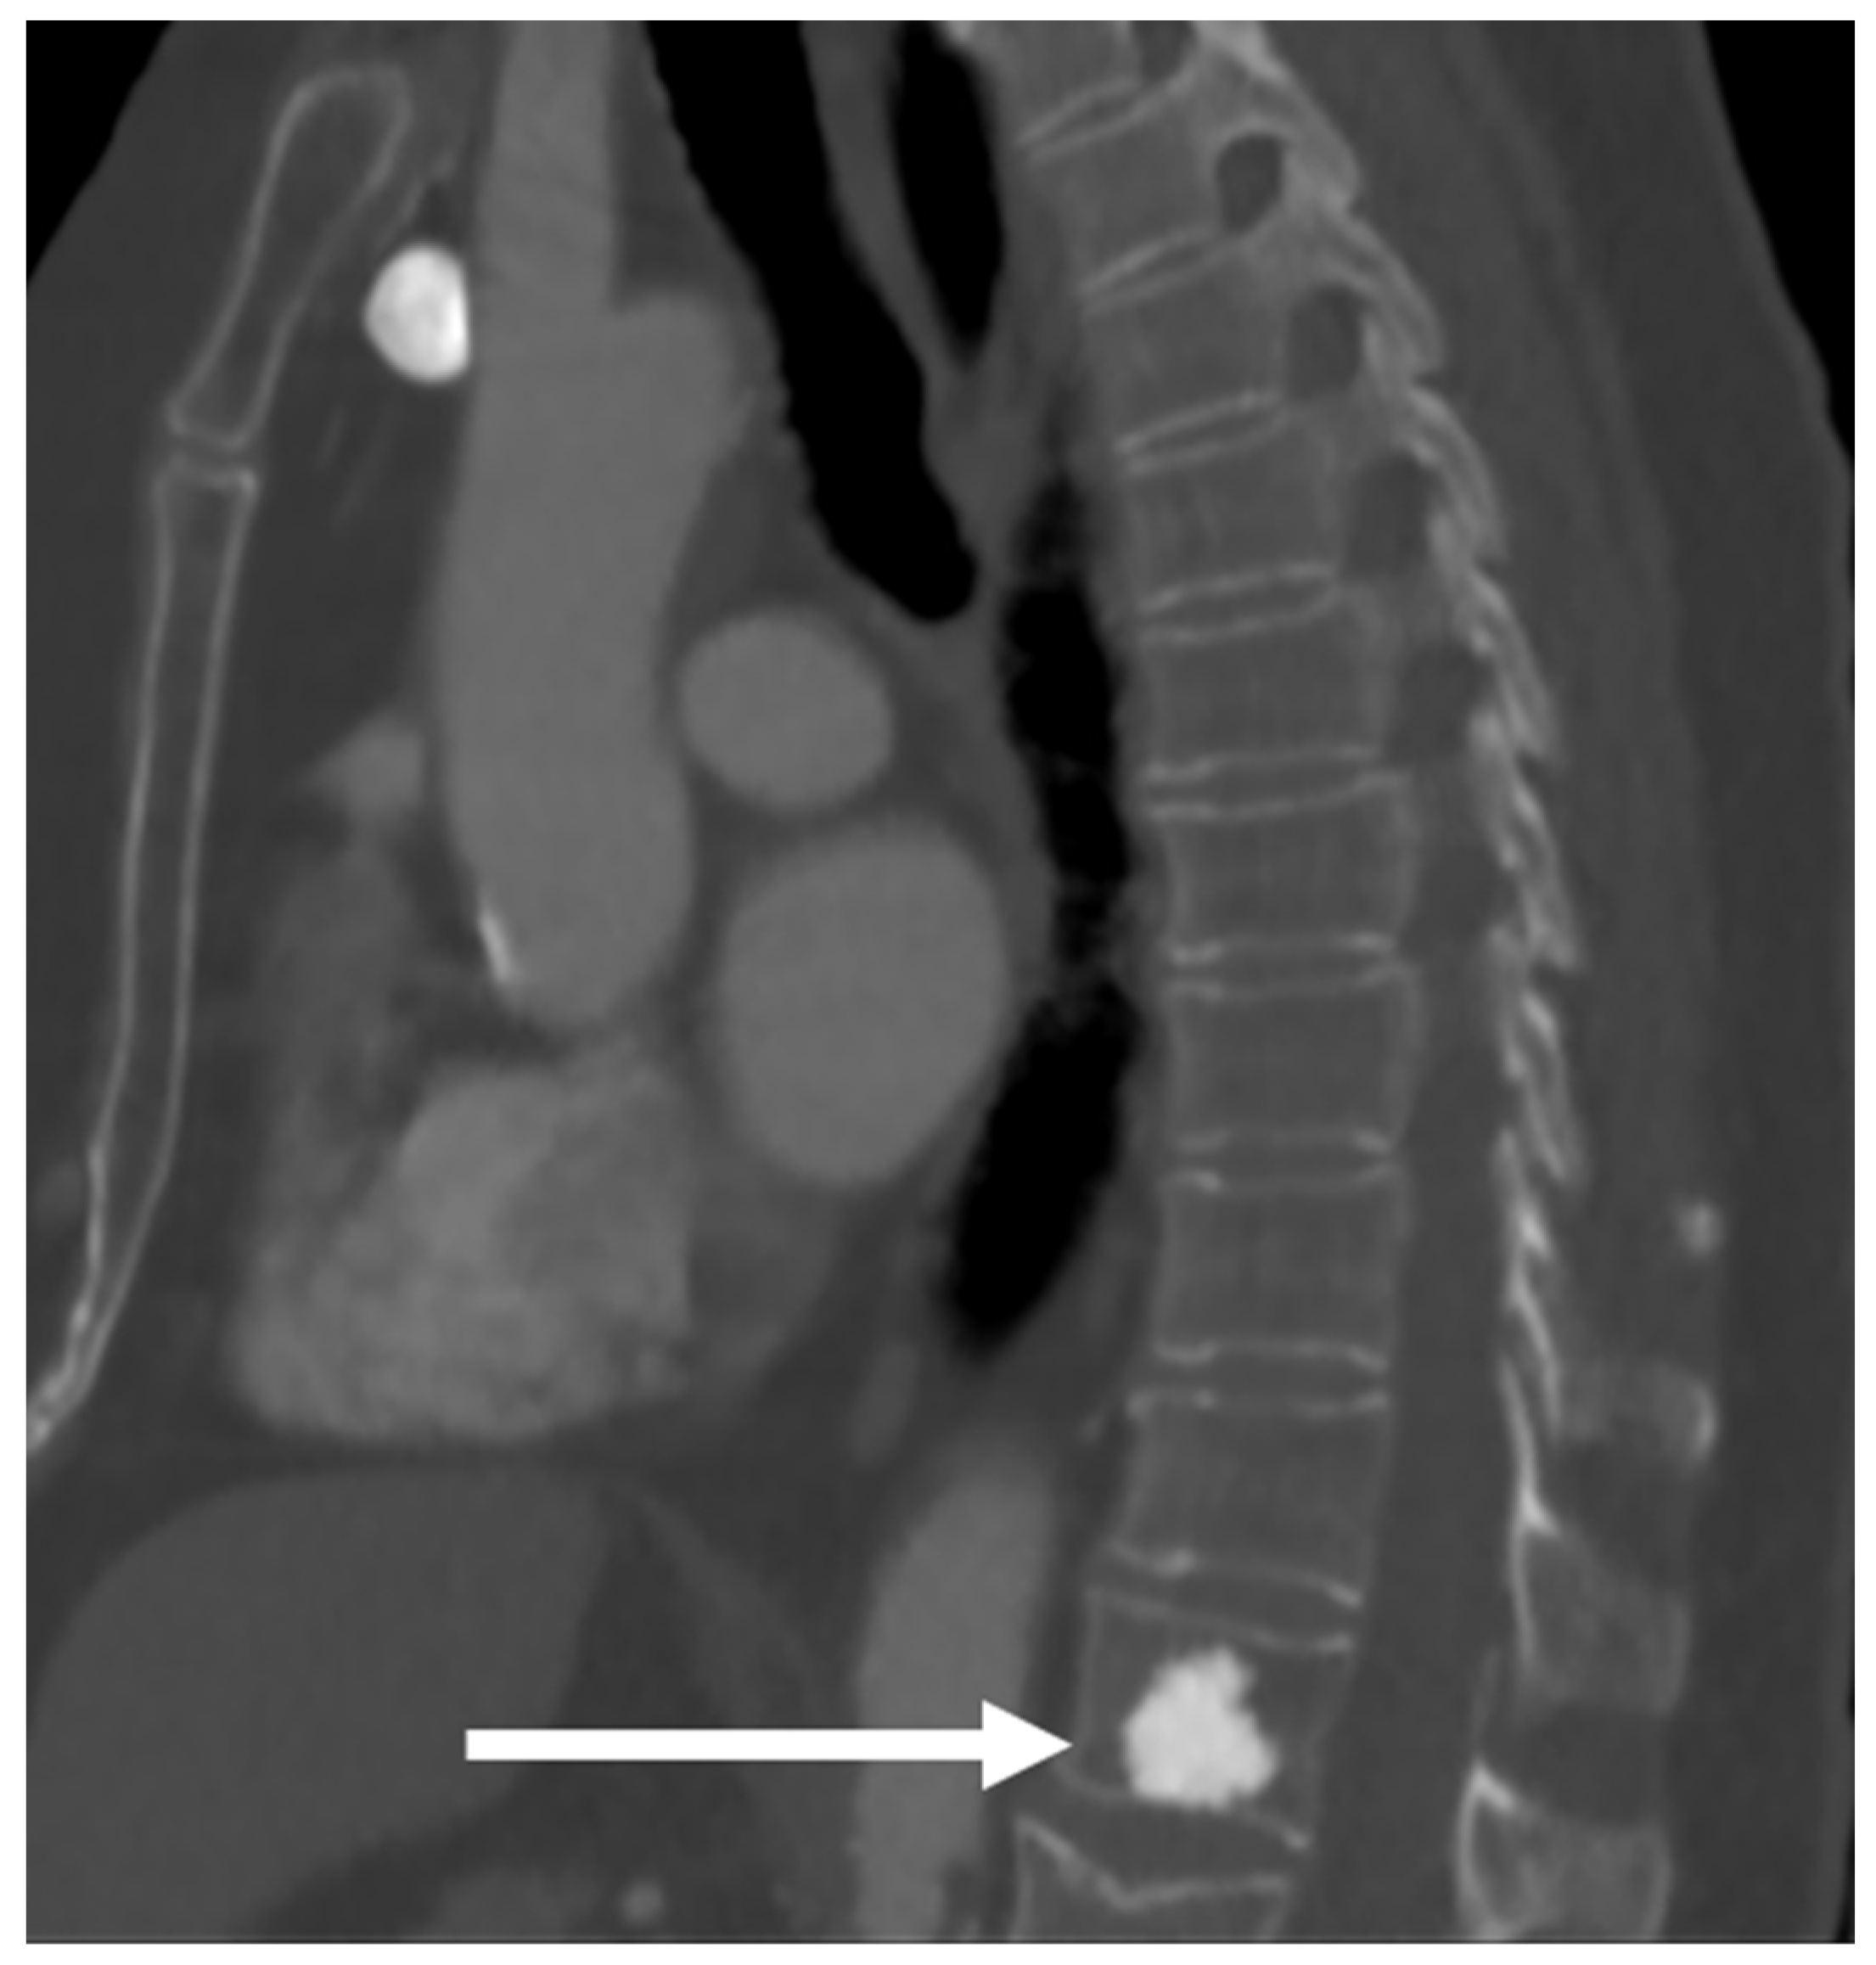 Hereditary multiple exostoses with spinal cord compression.